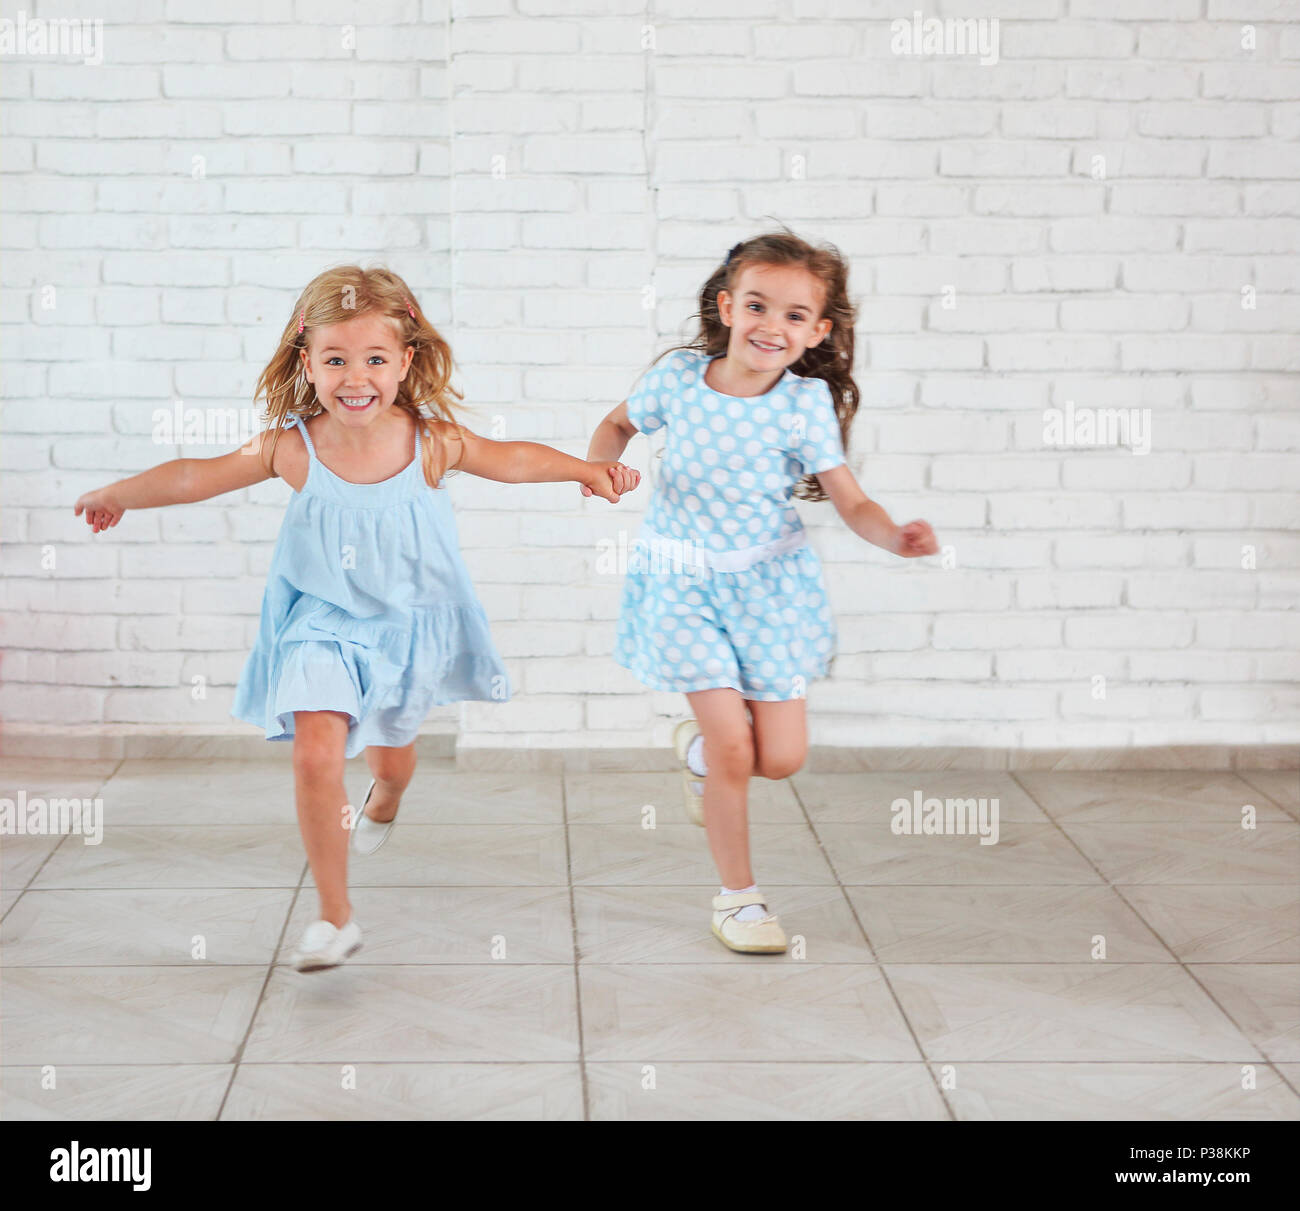 Two small girls playing and running indoors together Stock Photo